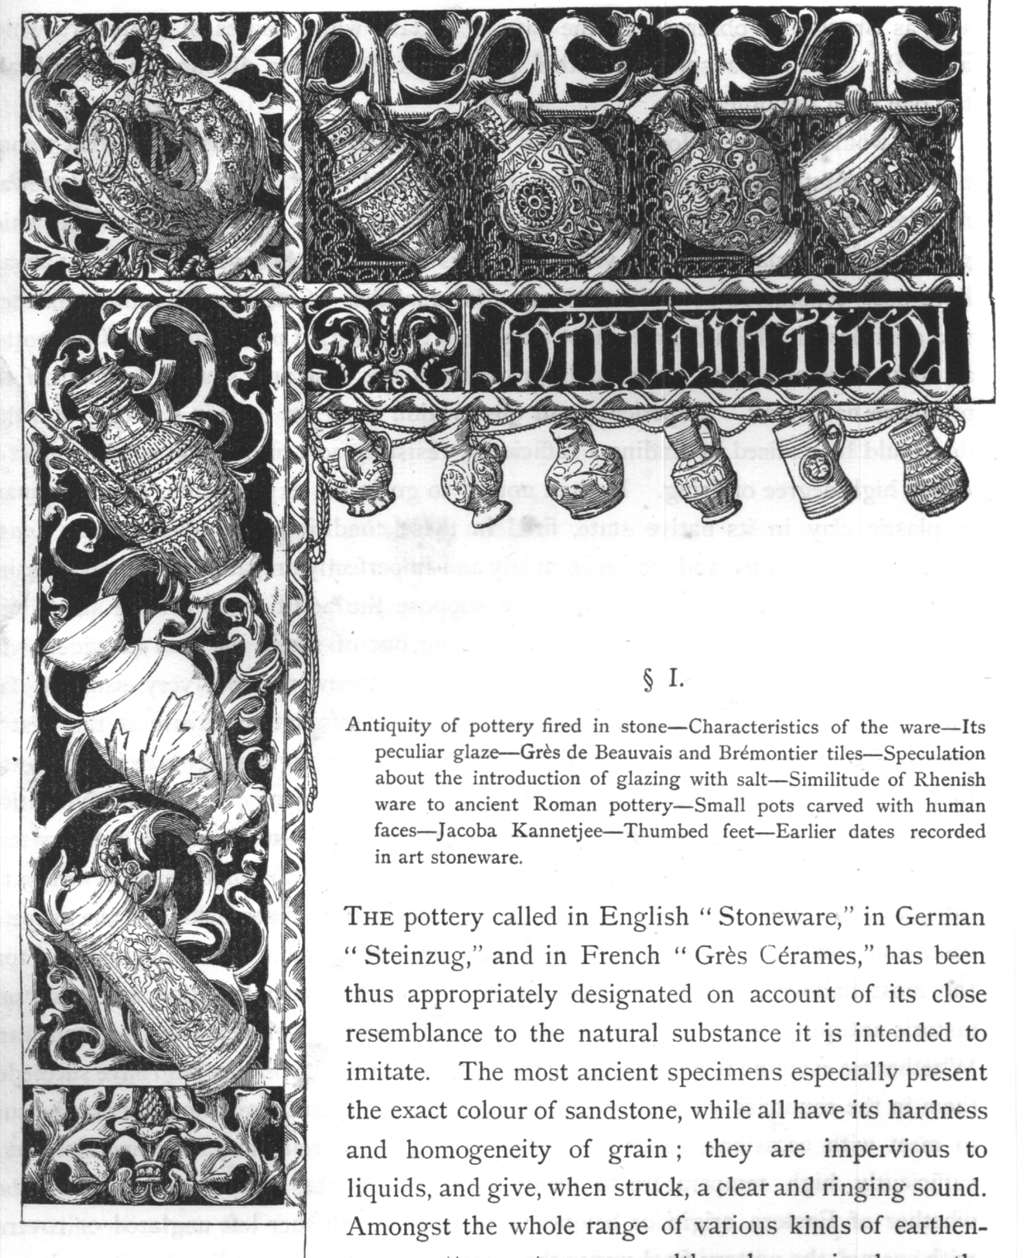 Einleitende Zeichnung und Text aus der Publikation „The ancient art stoneware of the low countries and Germany or Grès de Flandre & Steinzeug: it’s principal varieties, and the places where it was manufactured during the XVIth and XVIIth century“, von M.L. Solon (1892)